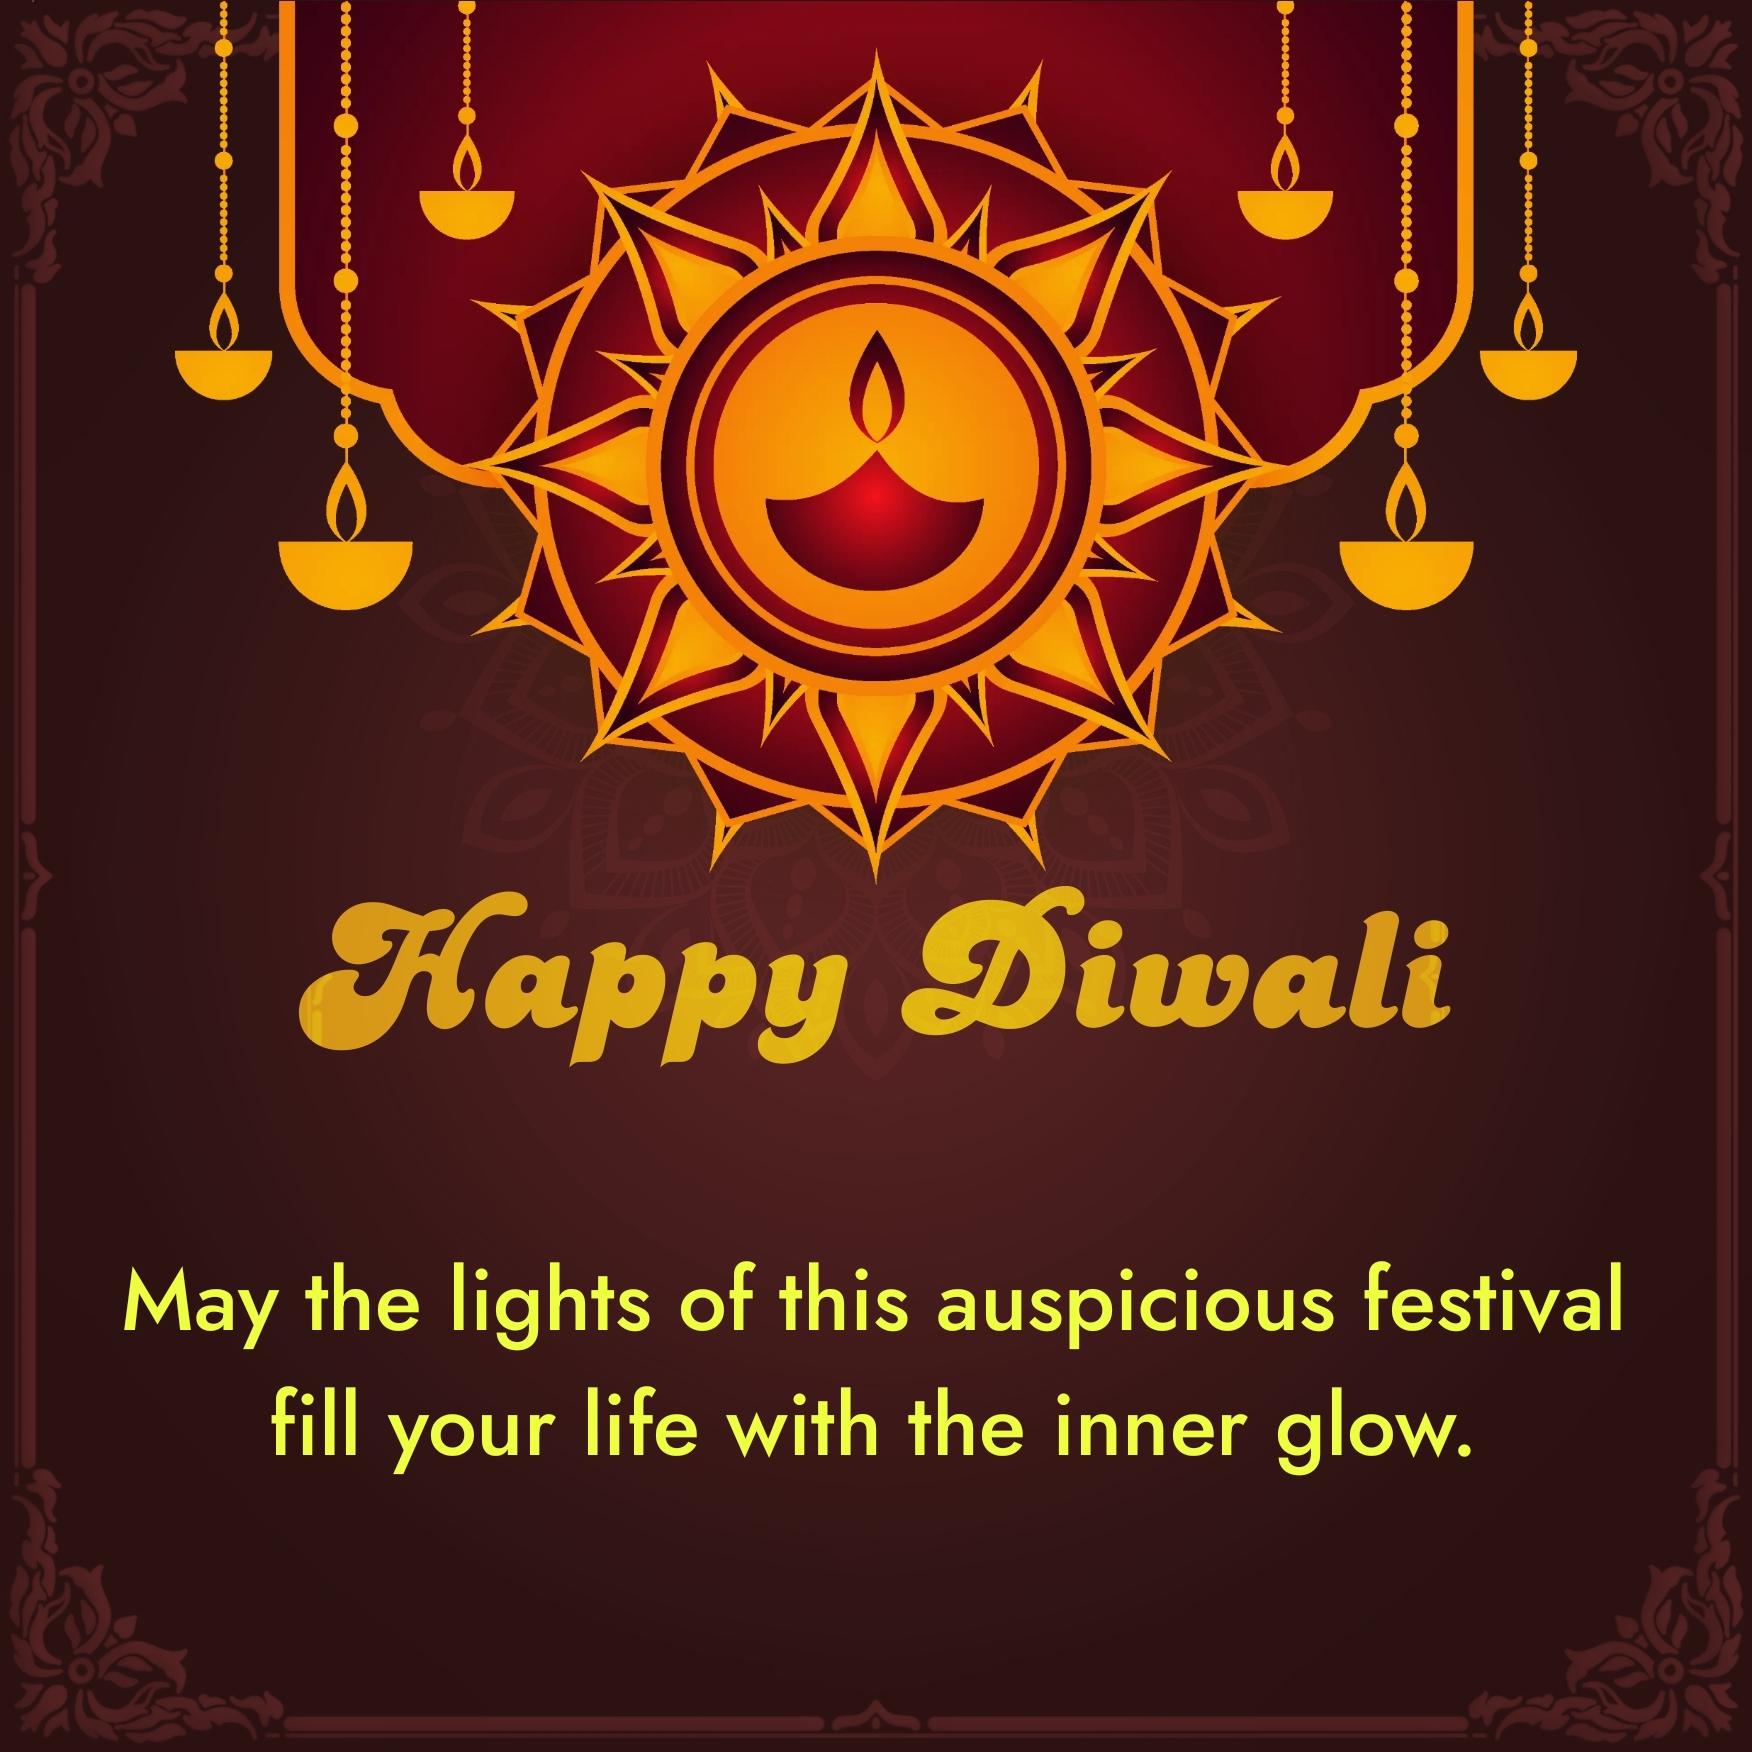 May the lights of this auspicious festival fill your life